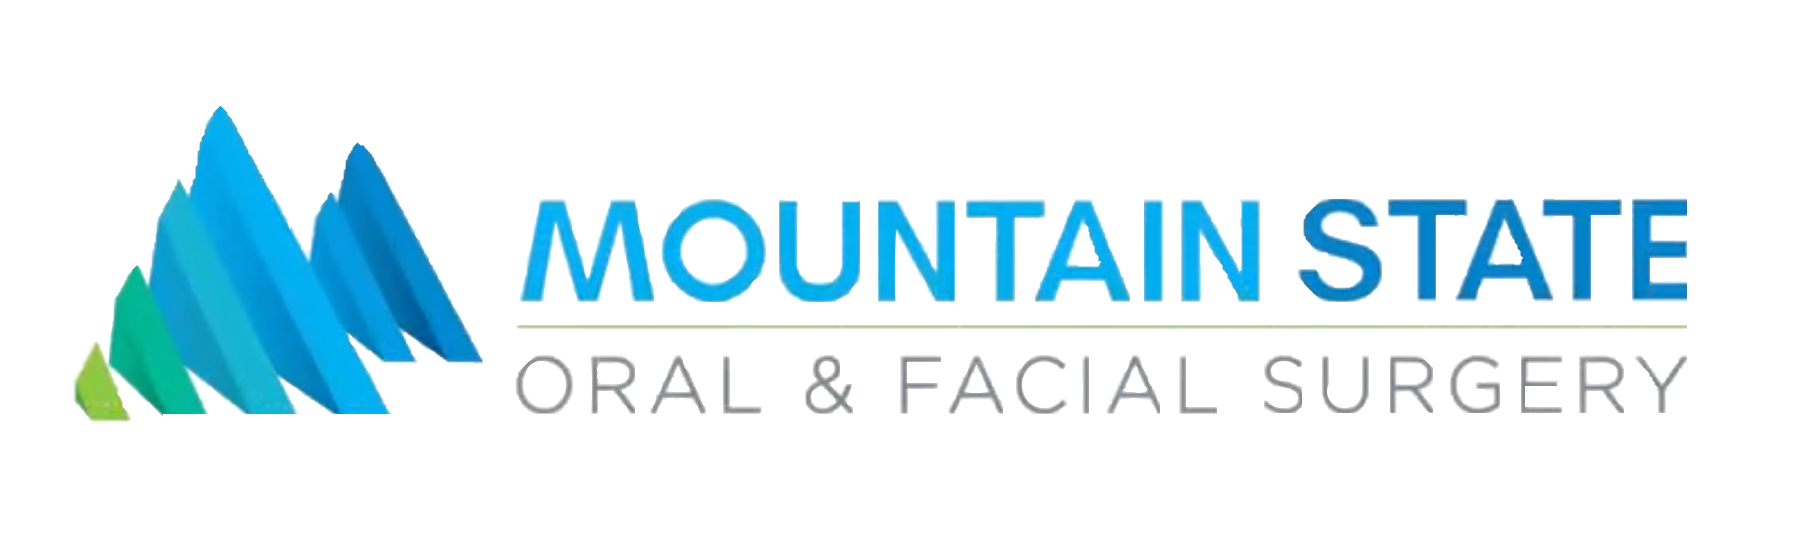 Outstanding Oral & Facial Cosmetic Surgery